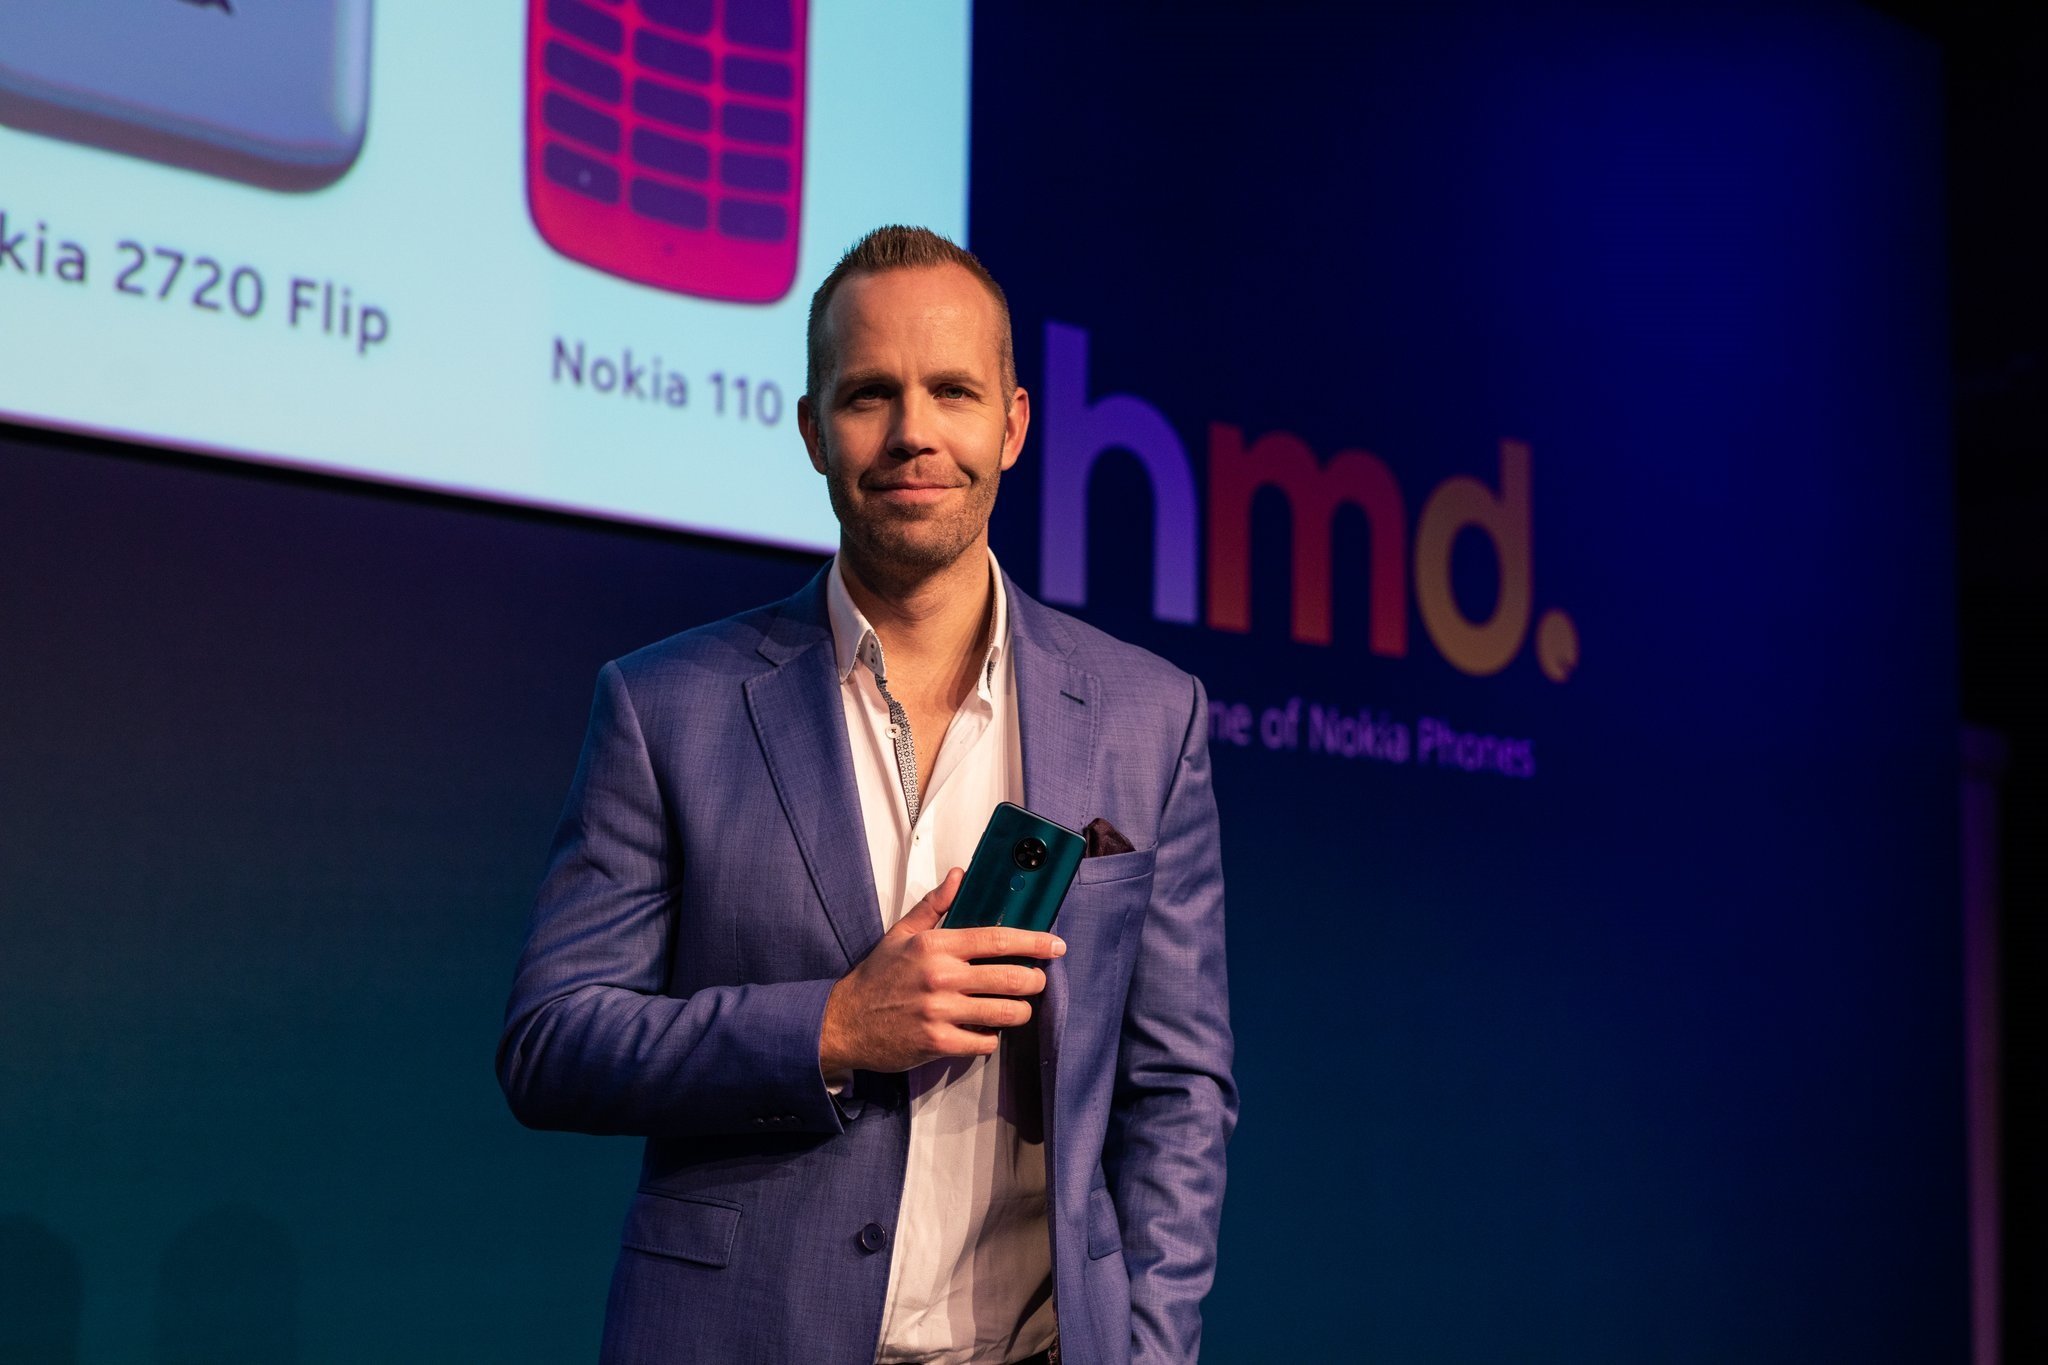 Juho Sarvikas announces his exit from HMD Global